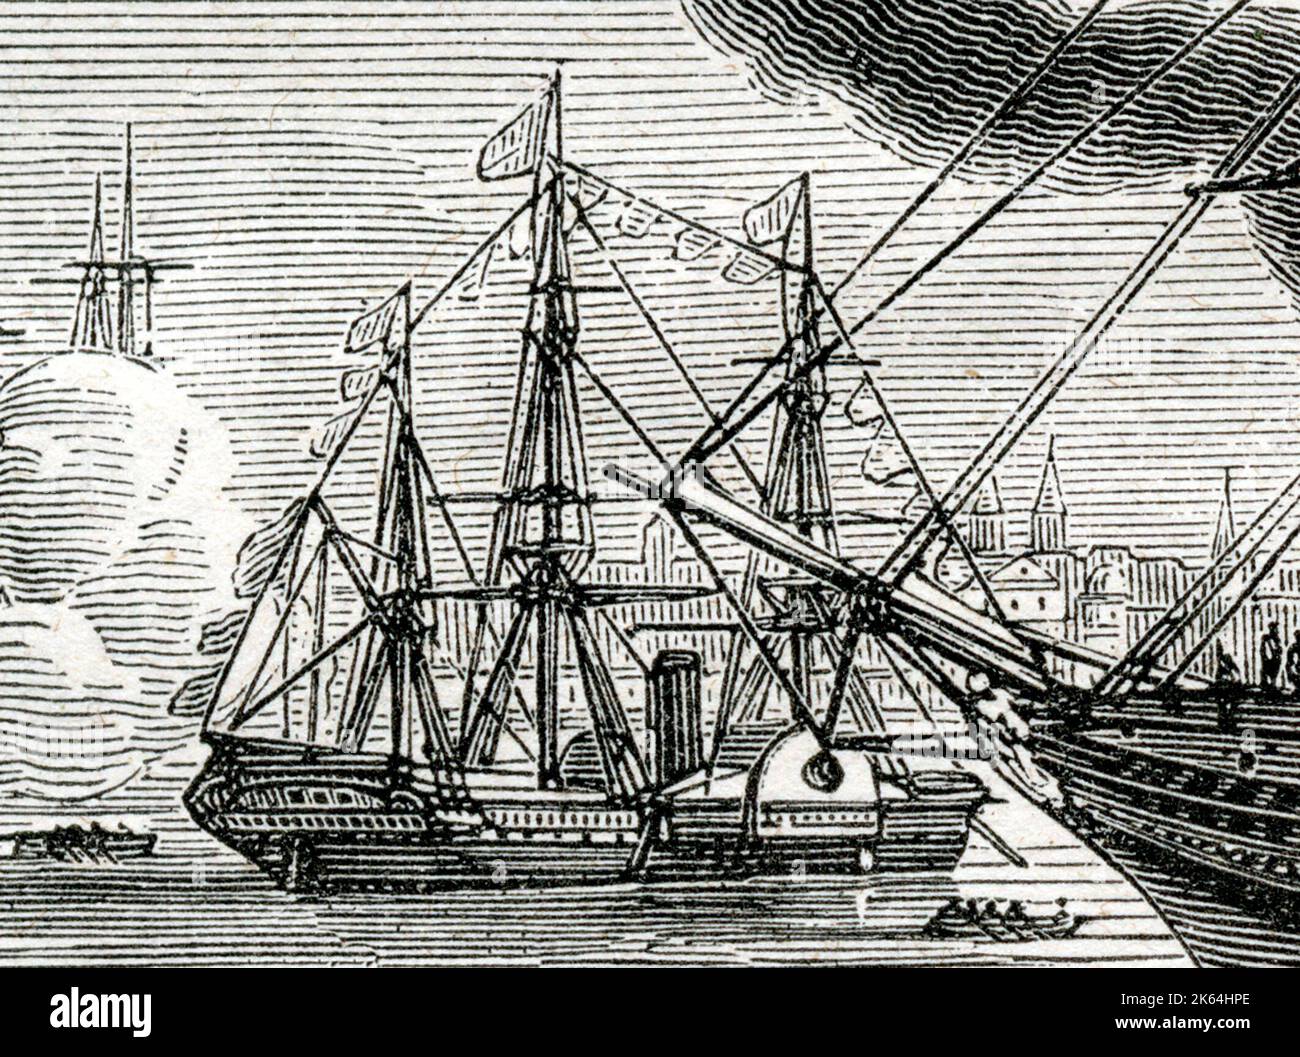 SS Sirius - a wooden-hulled sidewheel steamship built in 1837 by Robert Menzies & Sons of Leith, Scotland for the London-Cork route operated by the Saint George Steam Packet Company. in 1838, she entered transatlantic steam passenger service when chartered for two voyages by the British and American Steam Navigation Company. By arriving in New York a day ahead of the Great Western, she is usually listed as the first holder of the Blue Riband (this image is a detail of a larger image 10049294, also showing the Great Western). Stock Photo